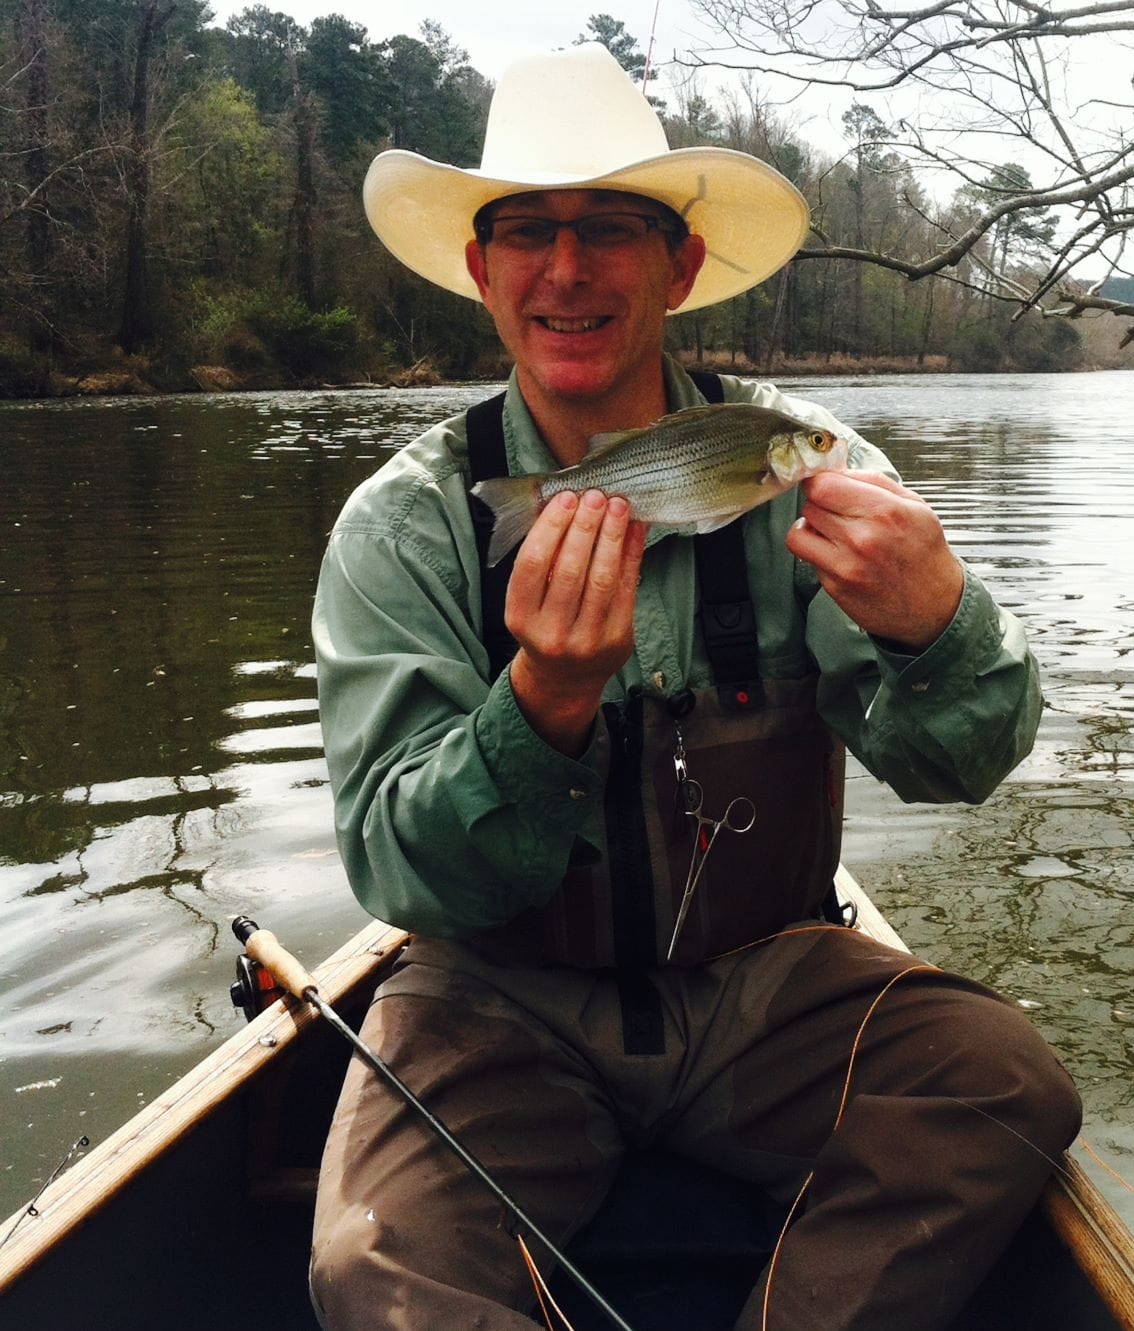 Rob fishing on the Haw River